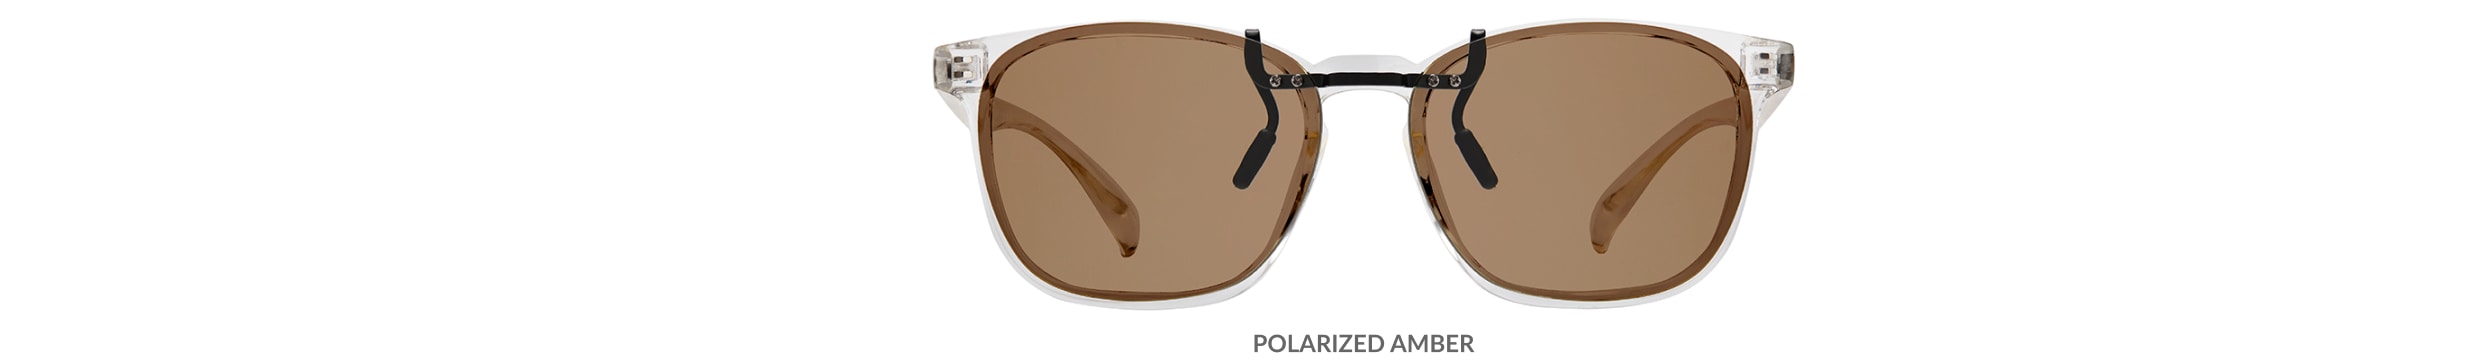 Custom clip-ons. Our polarized custom clip-ons reduce glare and are available for almost any frame. Each clip-on is specially cut to fit the frame with prices starting at just $3.95  (Compare to $50). Zenni square glasses #2020123 in clear, shown with amber polarized custom clip-on.